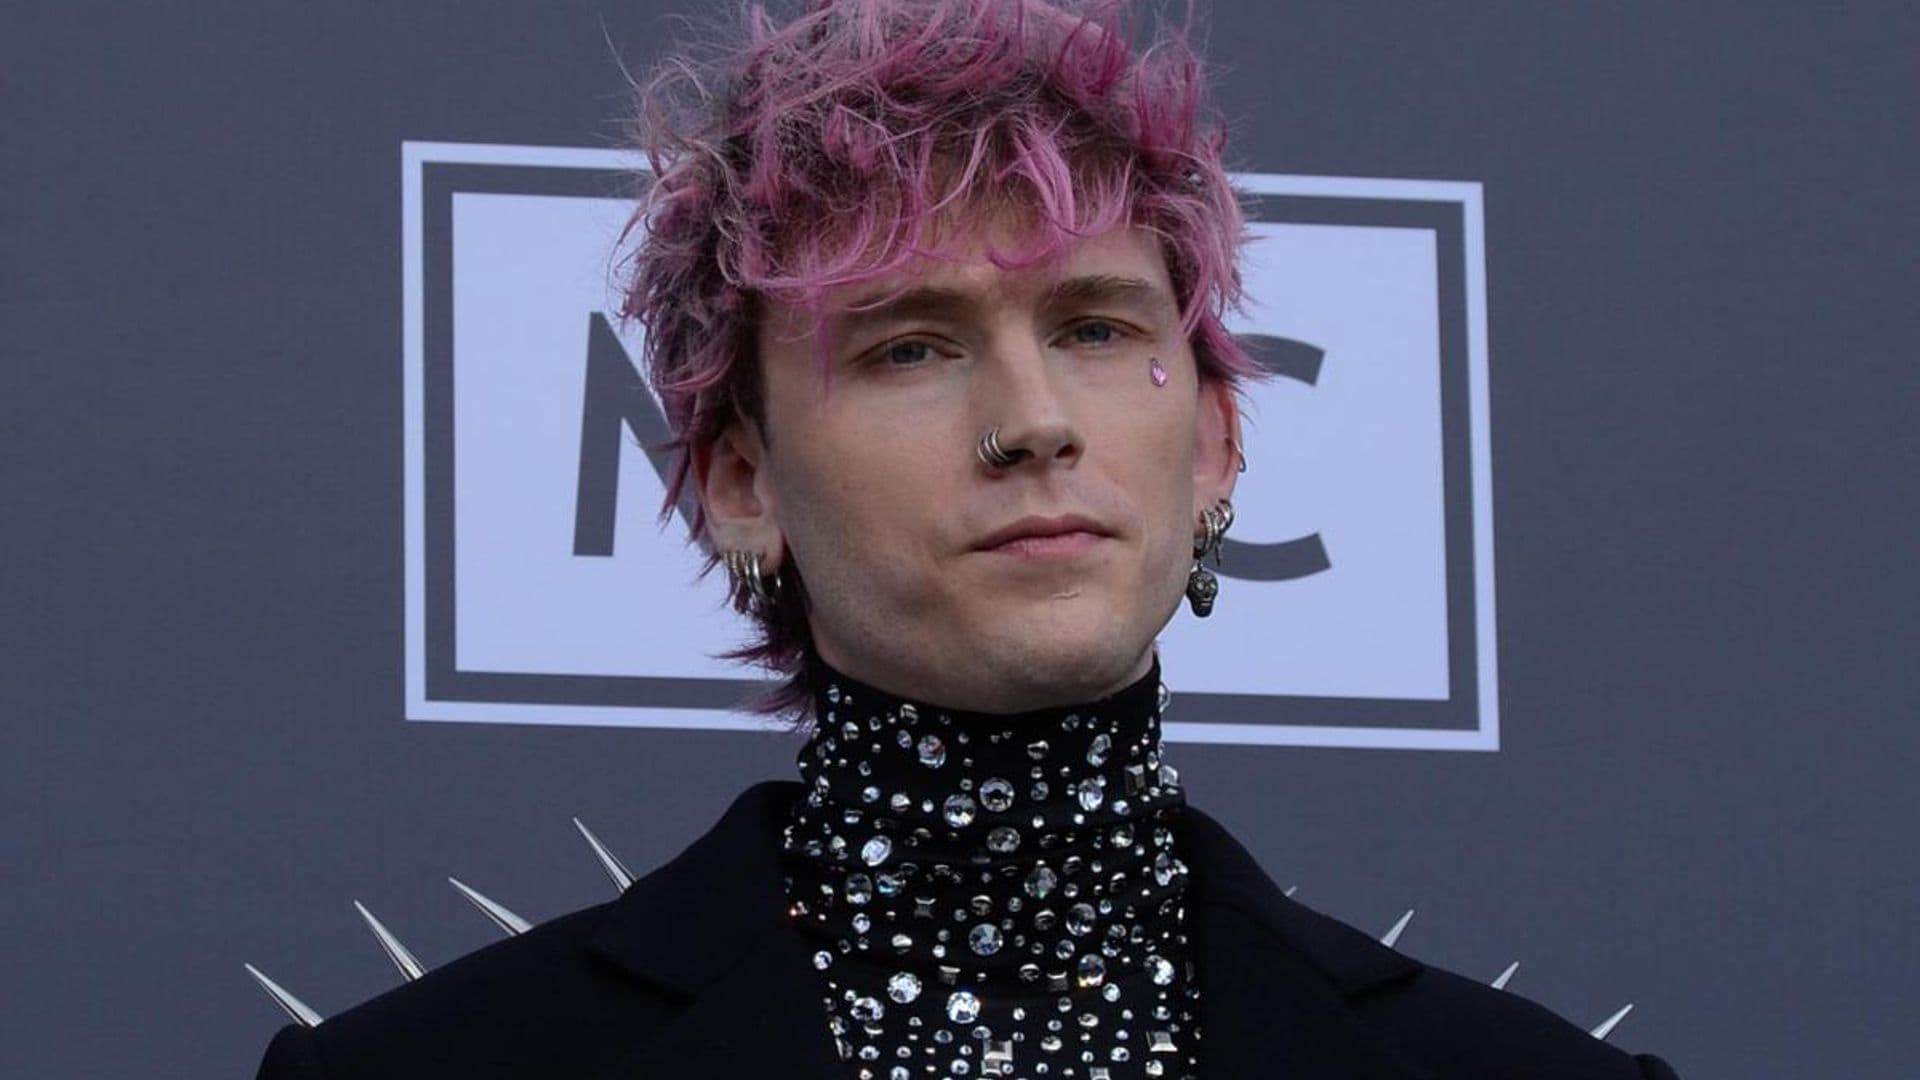 Machine Gun Kelly wears $30,000 diamond manicure auctioned for charity